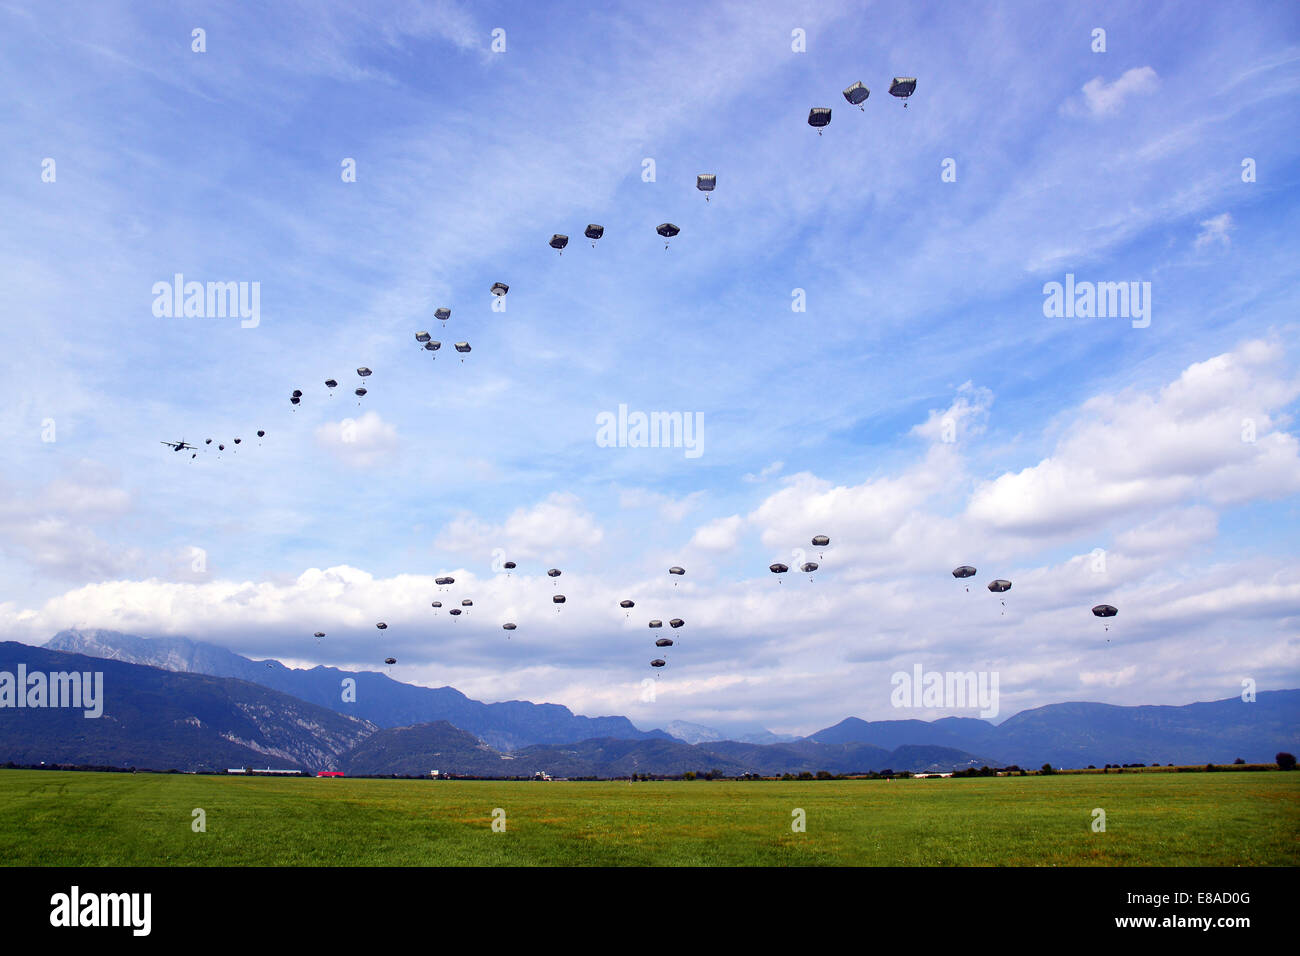 U.S. Army Paratroopers with the 173rd Brigade Support Battalion, 173rd Airborne Brigade Combat Team conduct an airborne operation with T-11 parachutes from a C-130 Hercules aircraft at Juliet Drop Zone in Pordenone, Italy, Sept. 24, 2014. The C-130 Hercul Stock Photo